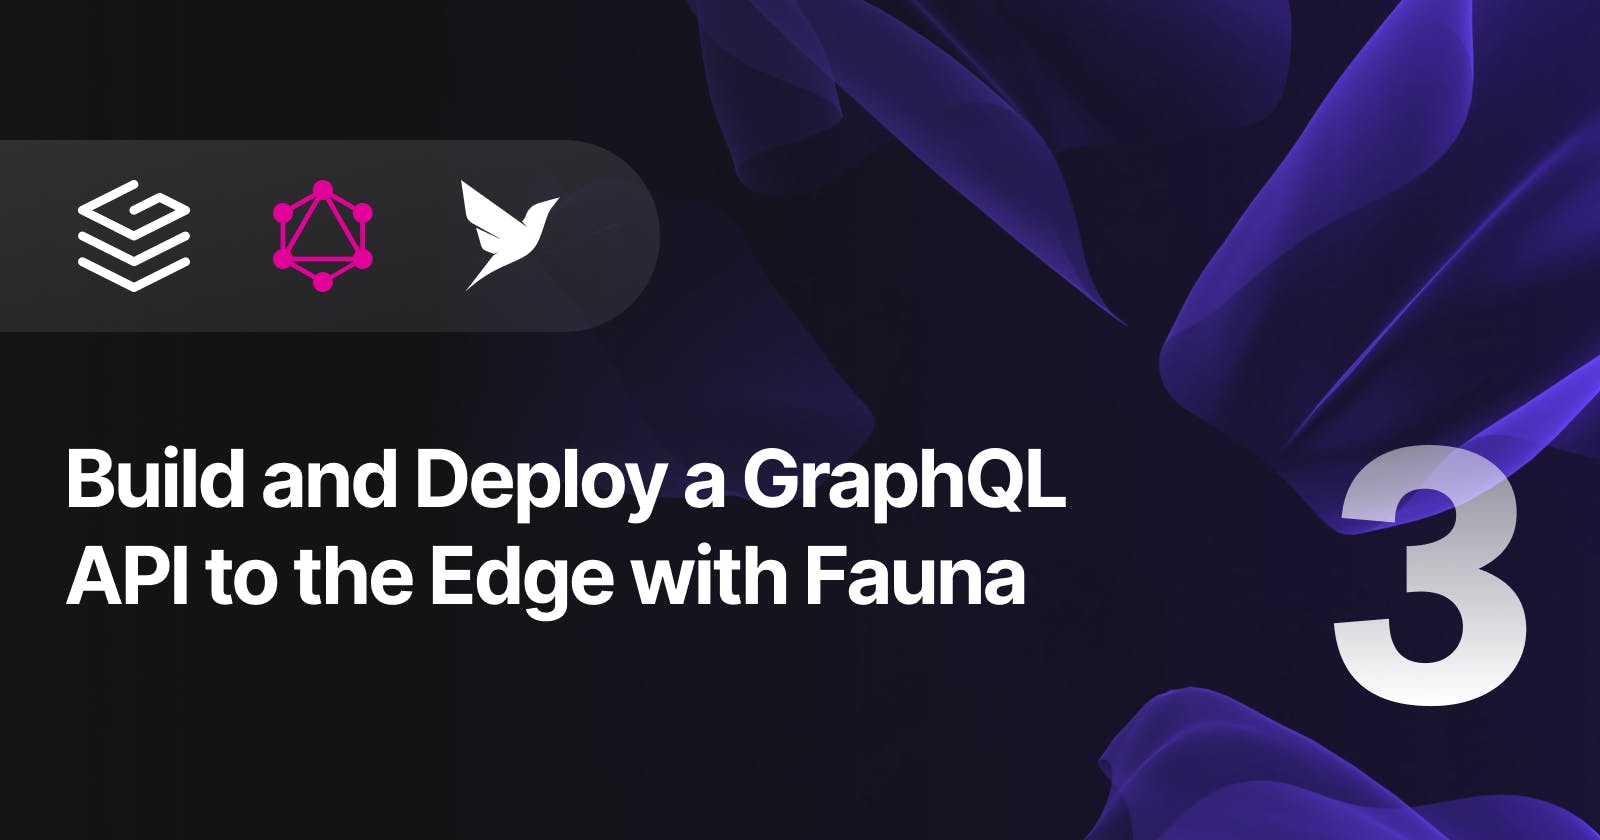 Build and Deploy a GraphQL API to the Edge with Fauna — Part 3